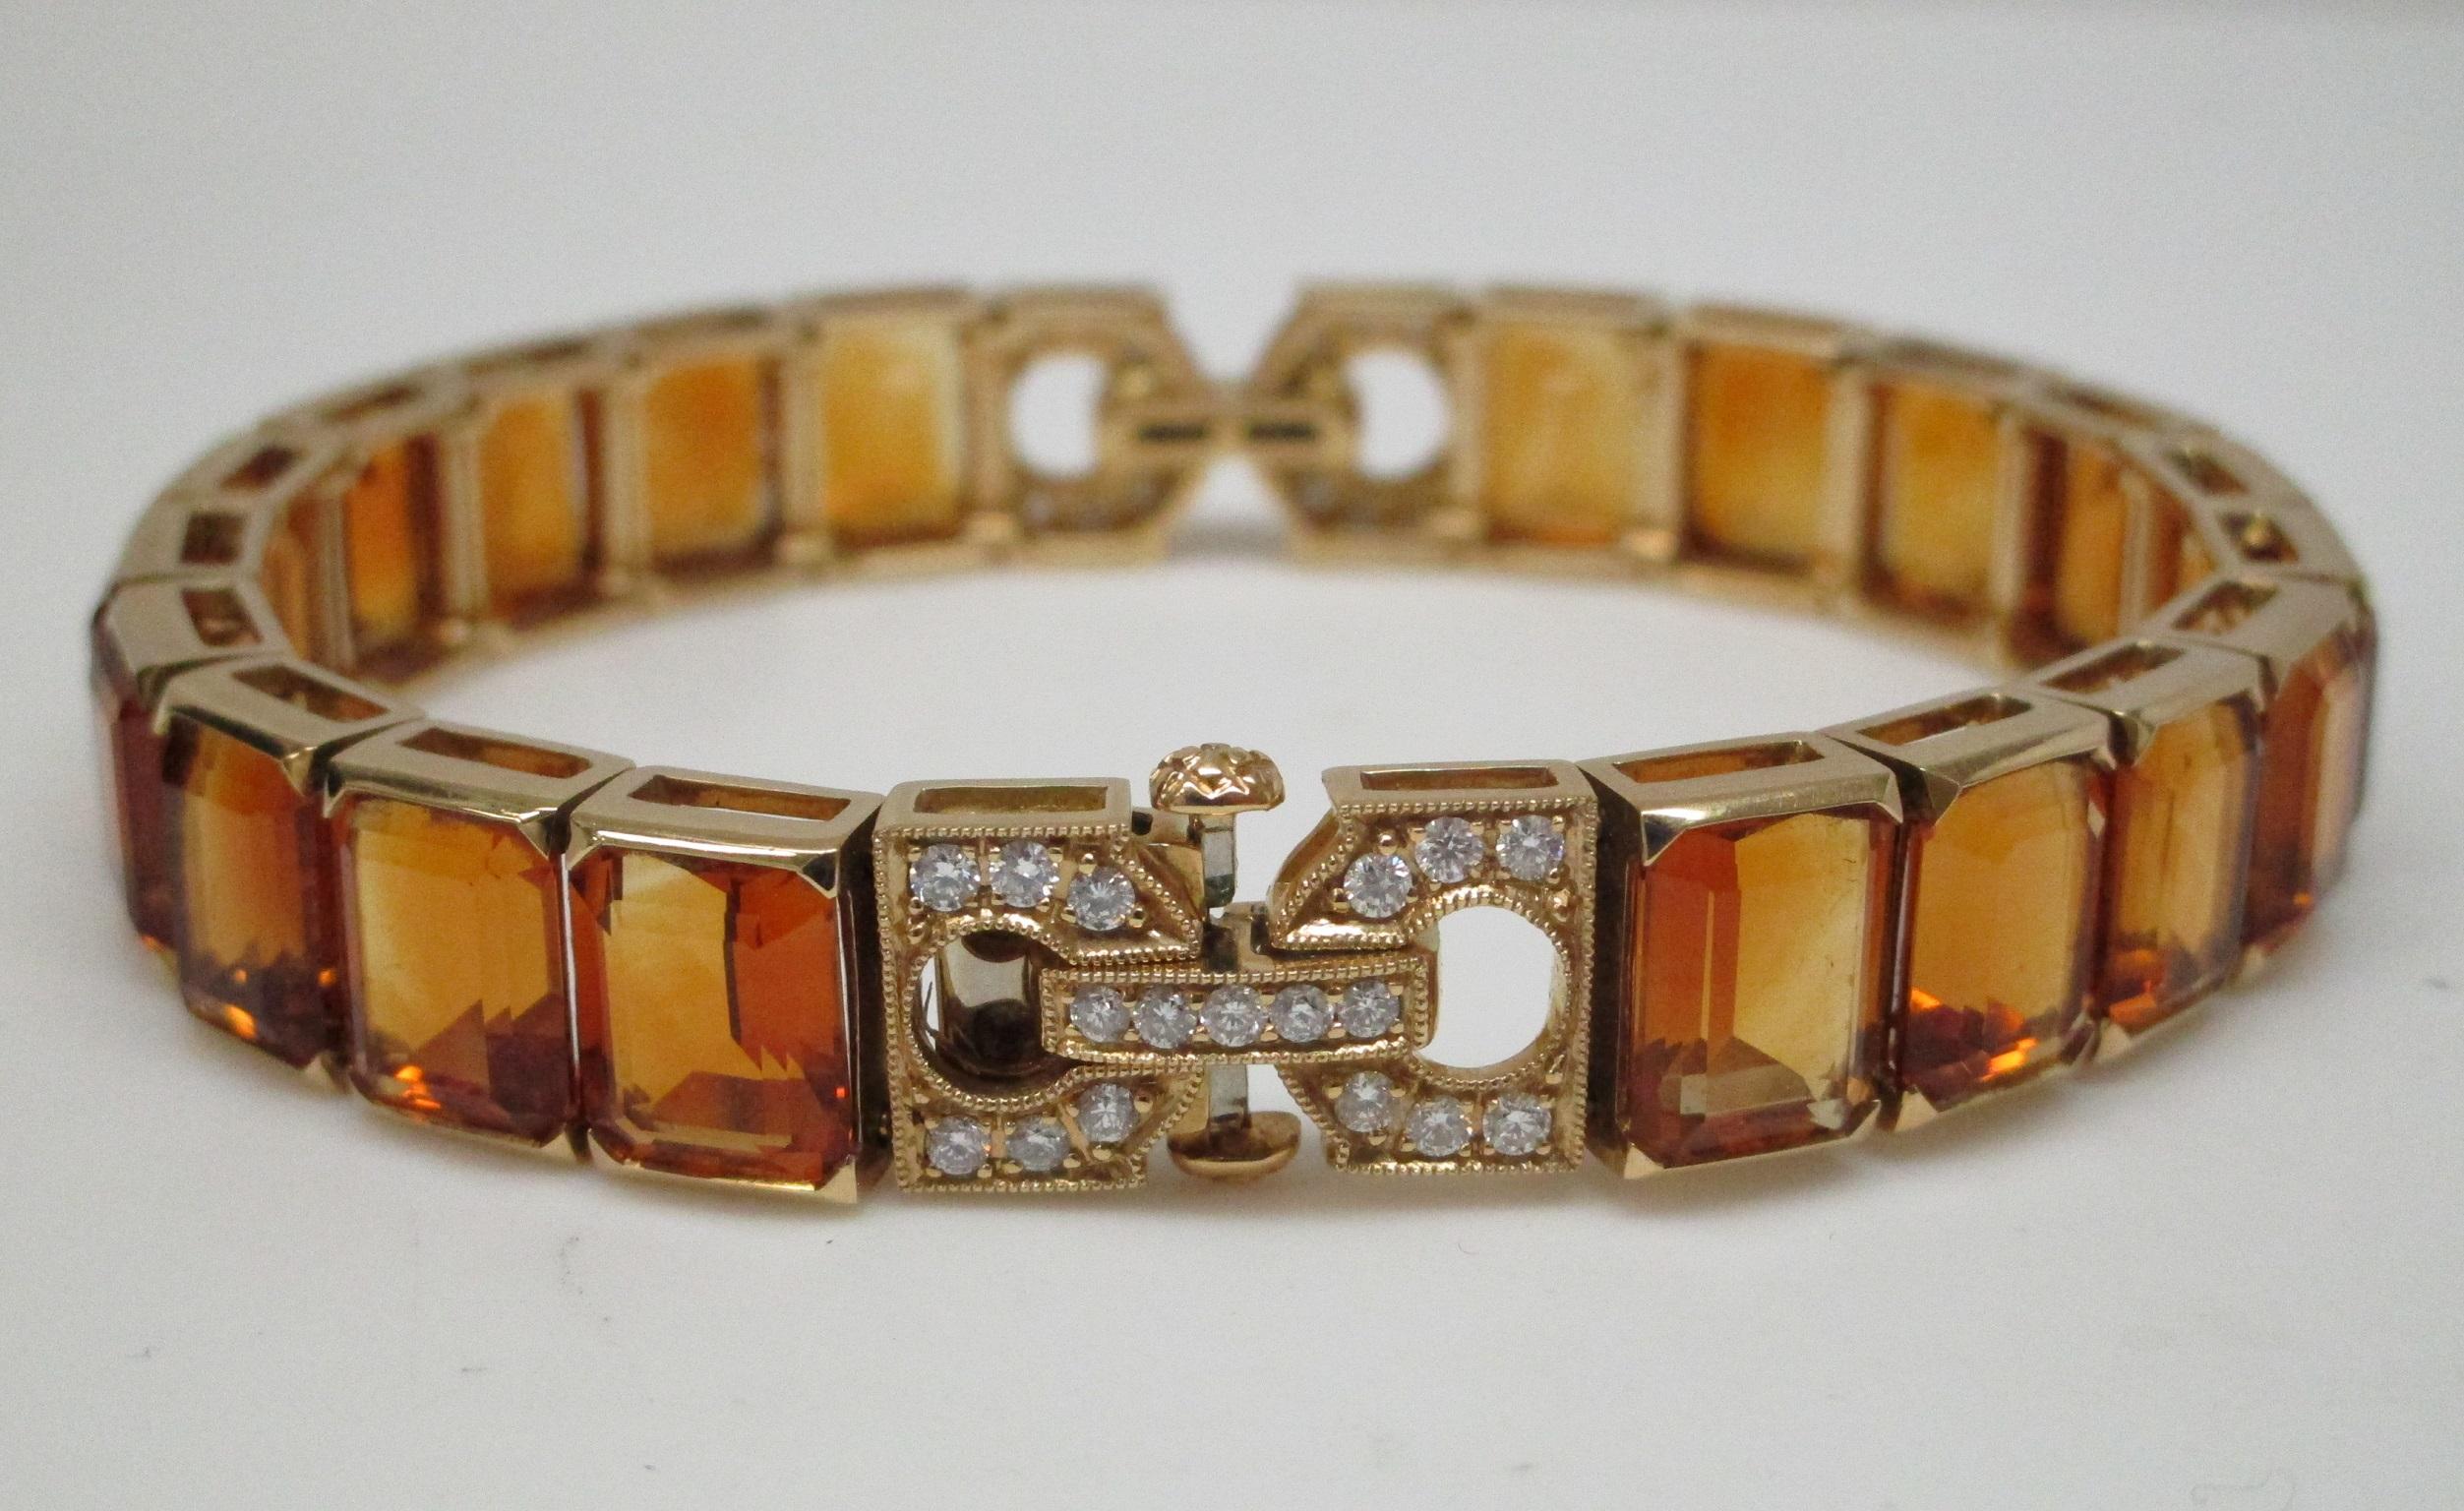 A lovely 18 Karat Yellow Gold Citrine Diamond Bracelet! This bracelet will bring a ray of sunshine into your day. It has 60 carats of Citrine and 0.40 carat worth of Diamonds, all set in 18K yellow gold. It is a joy to wear and a sight to behold. If